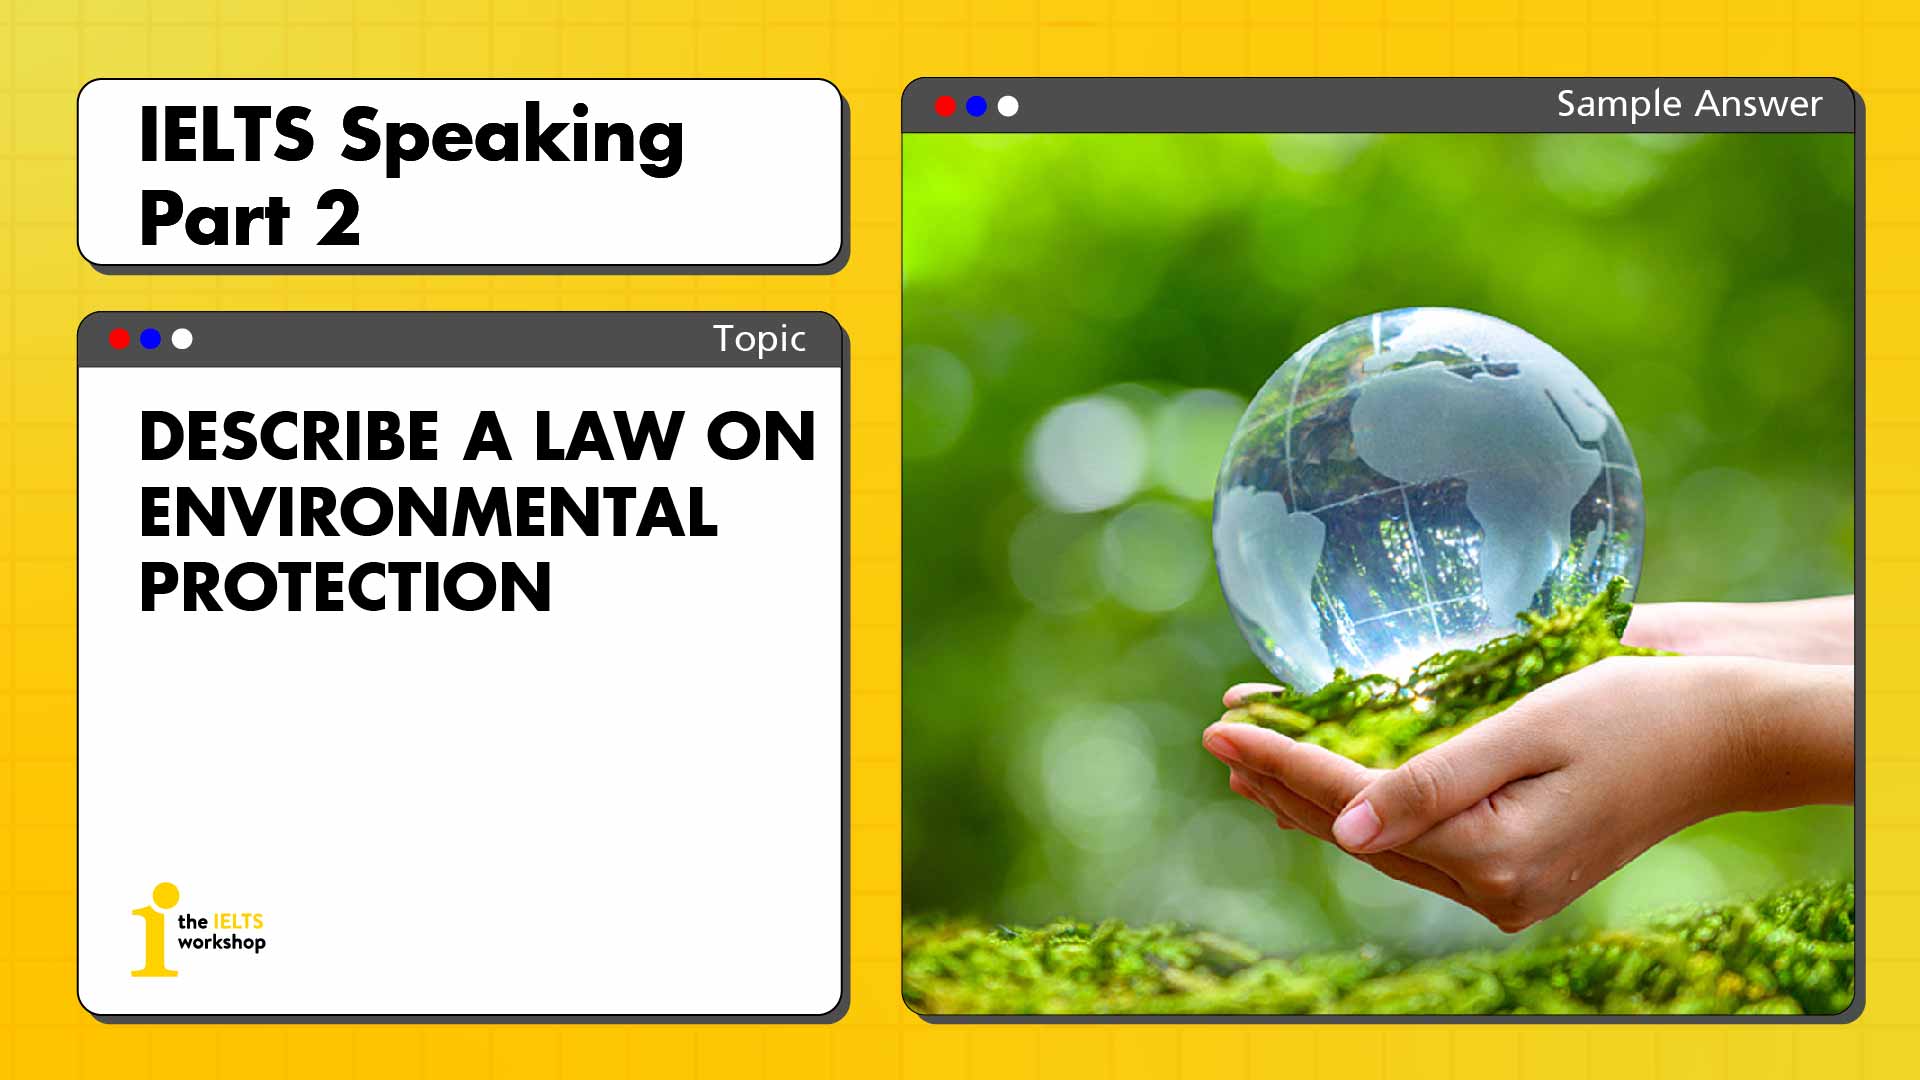 describe a law on environmental protection speaking part 2